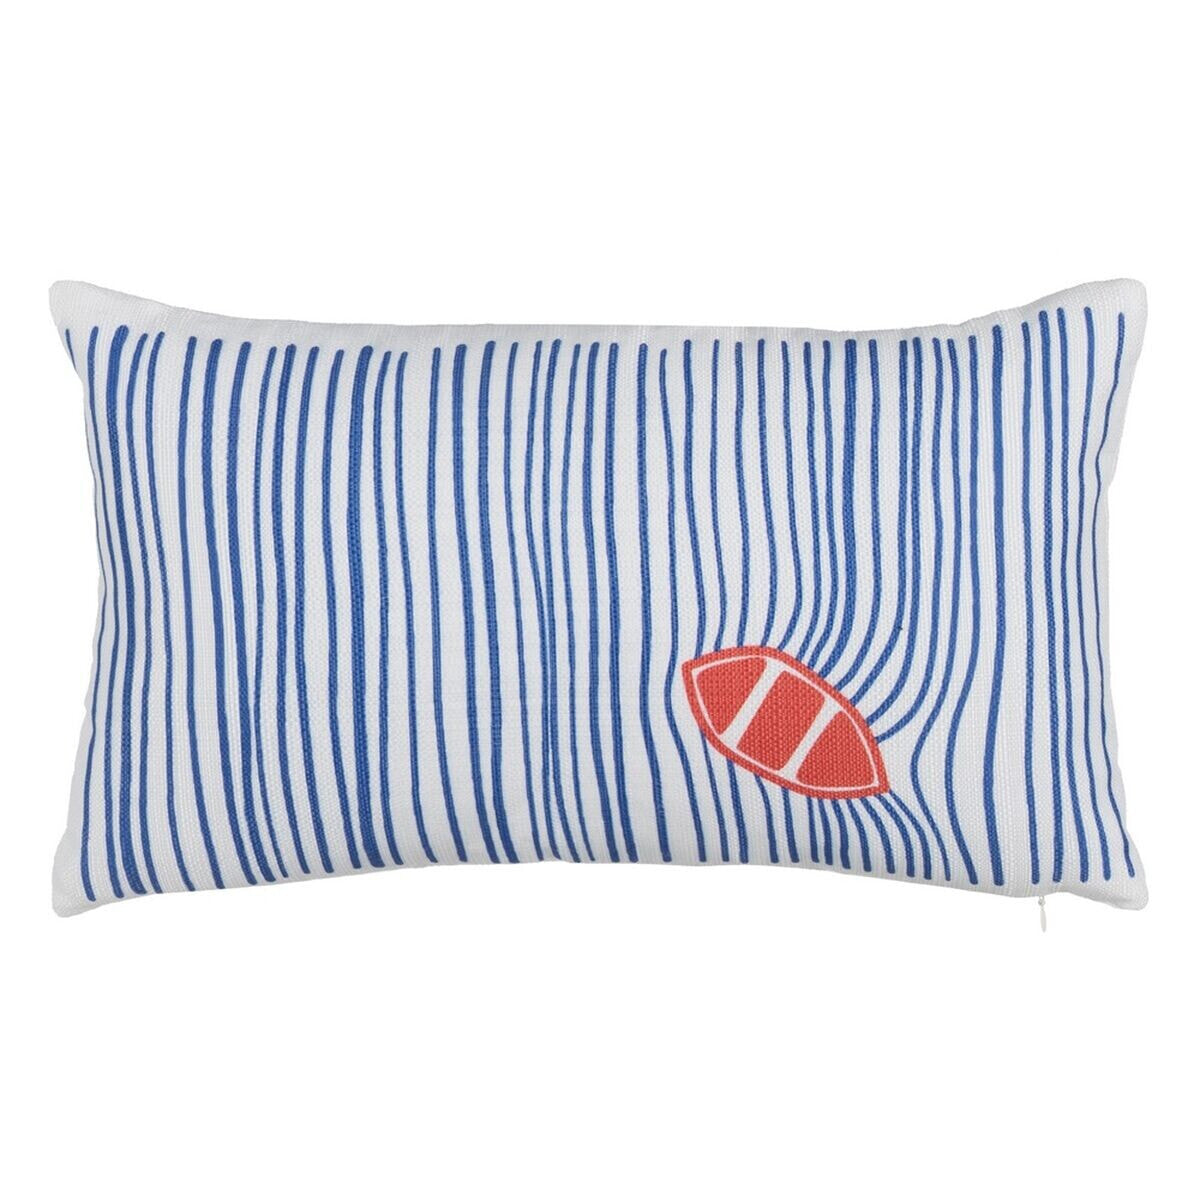 Cushion Polyester Blue White Red 50 x 30 cm